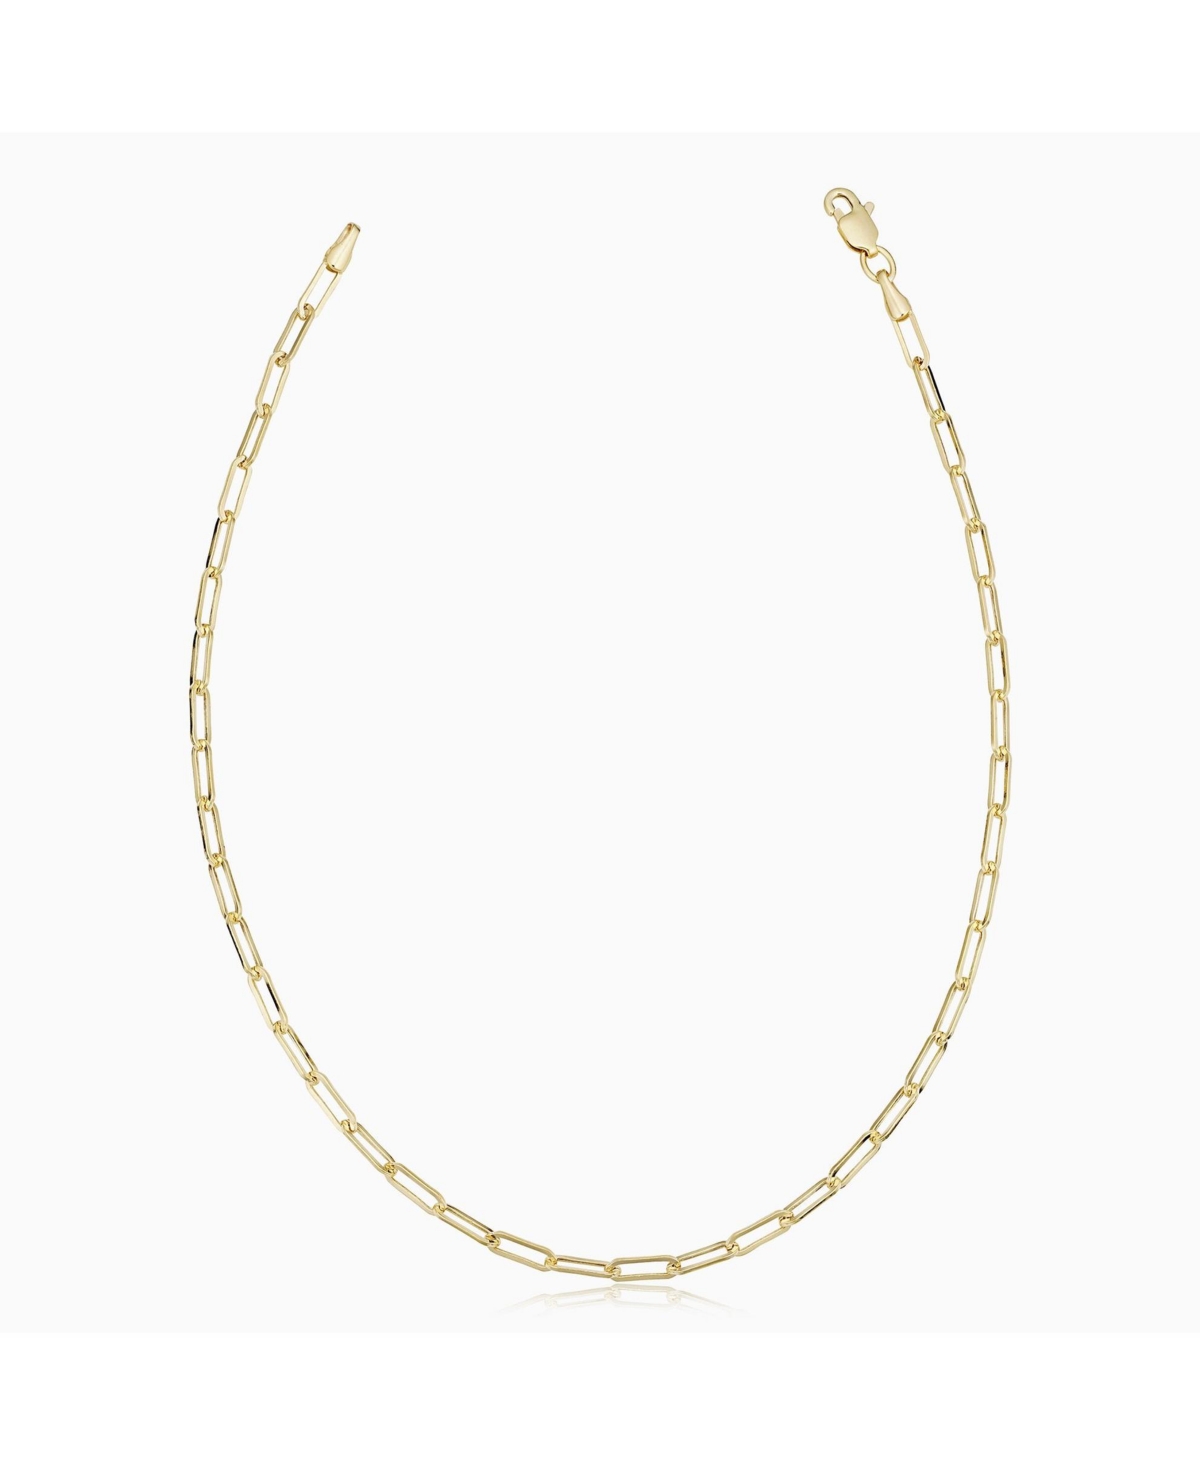 ORADINA VENICE LINK PETITE ANKLET IN 14K YELLOW GOLD